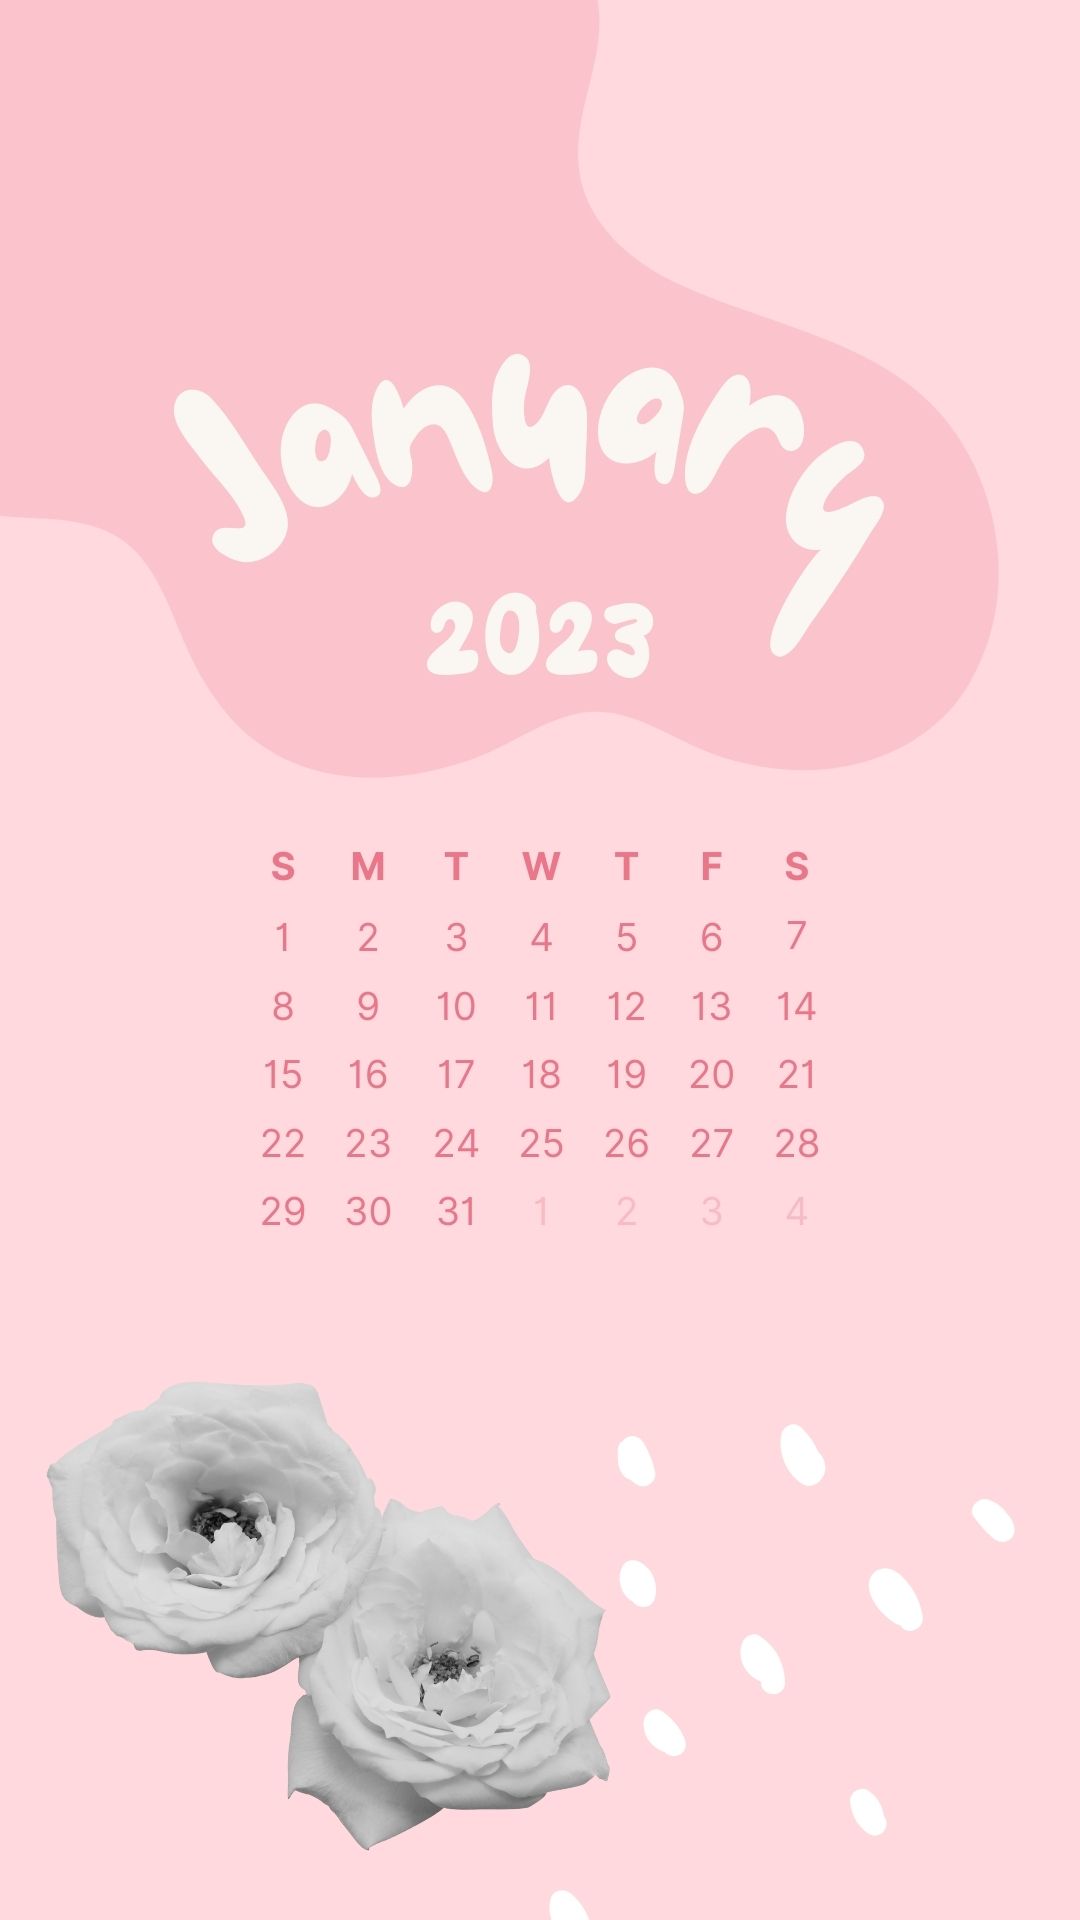 January 2023 free aesthetic calendar wallpaper / lock screen background for your phone ⋆ The Aesthetic Shop